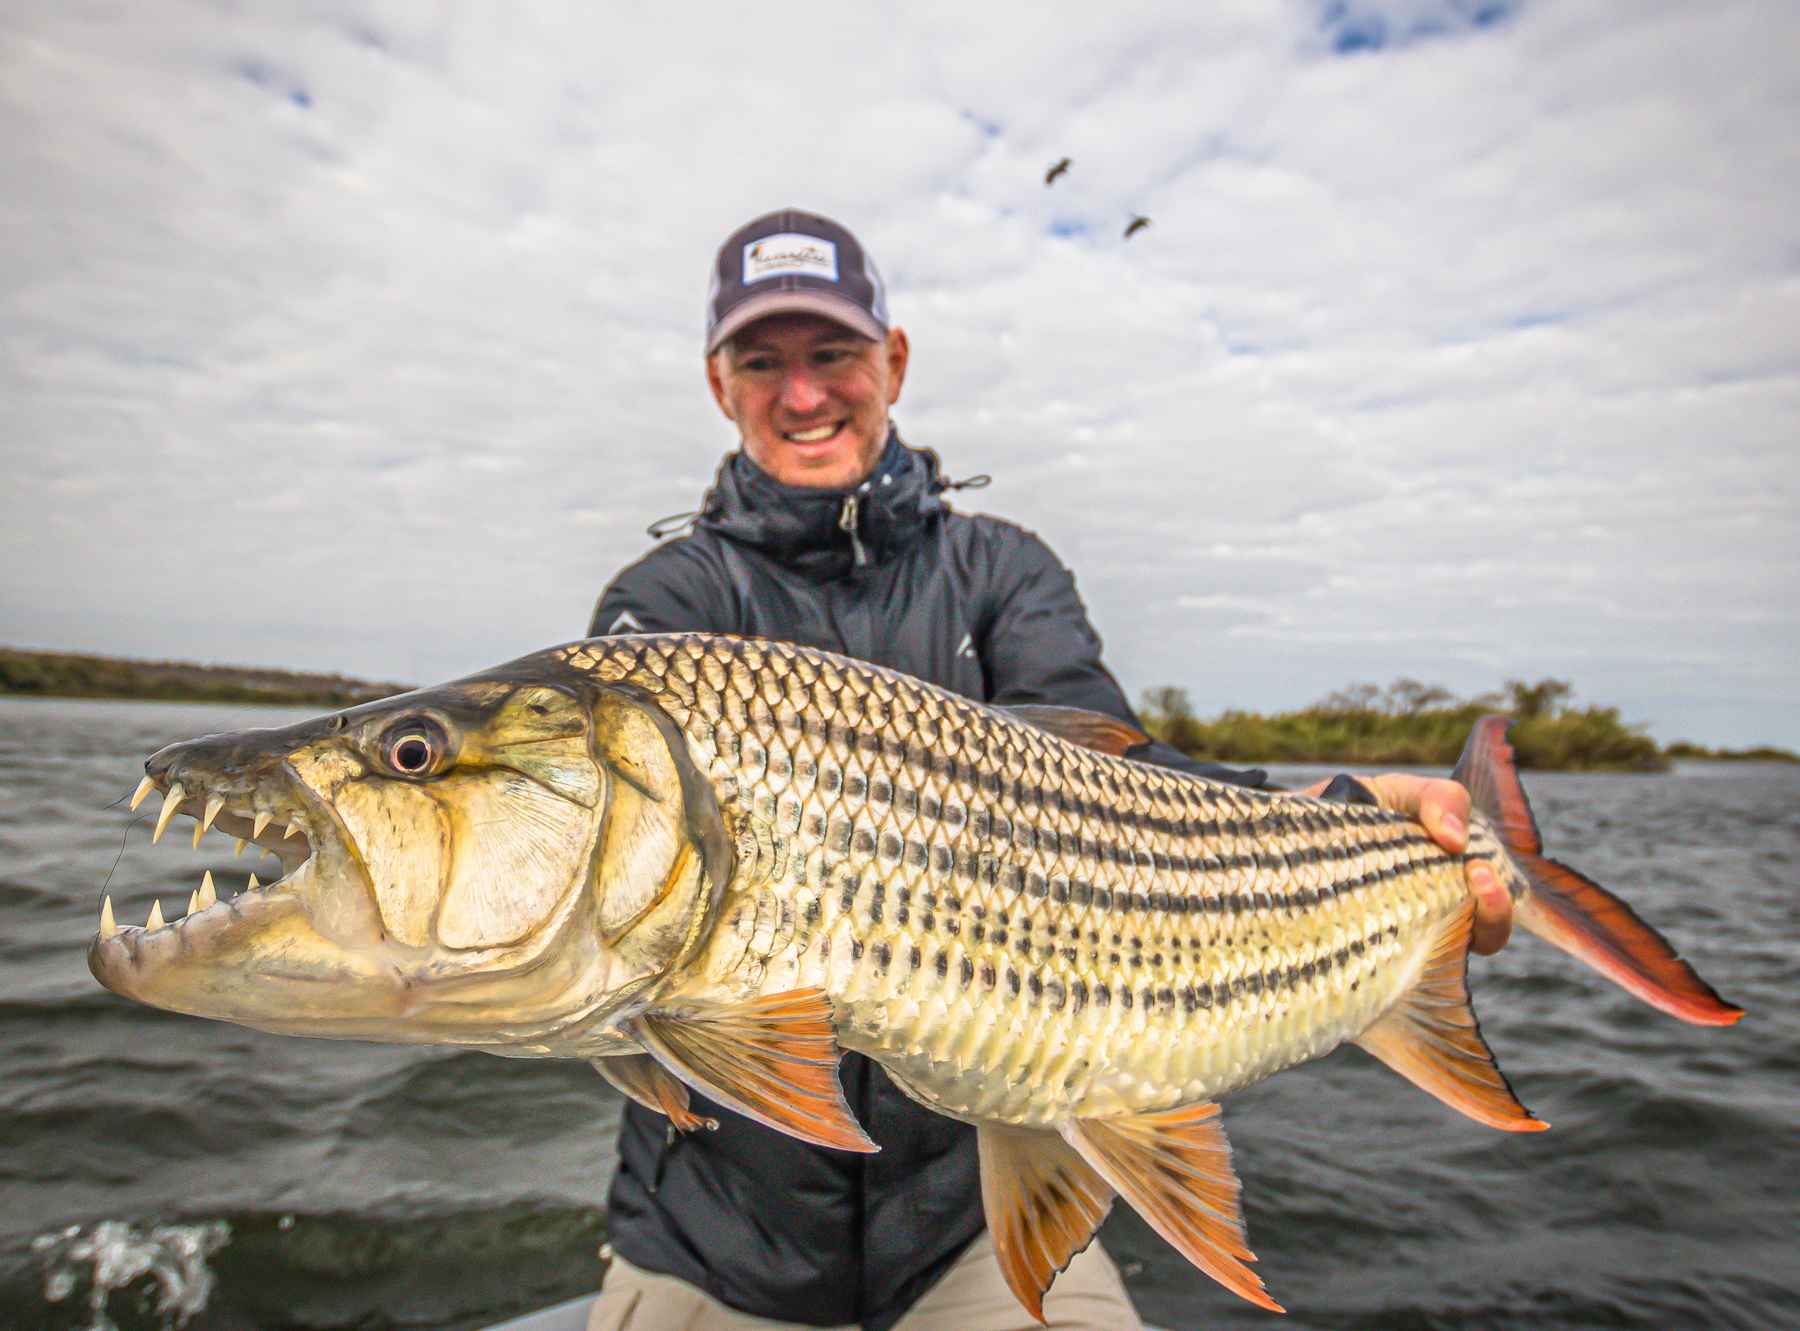 http://www.hatchmag.com/sites/default/files/styles/extra-large/public/field/image/tigerfish1010-5.jpg